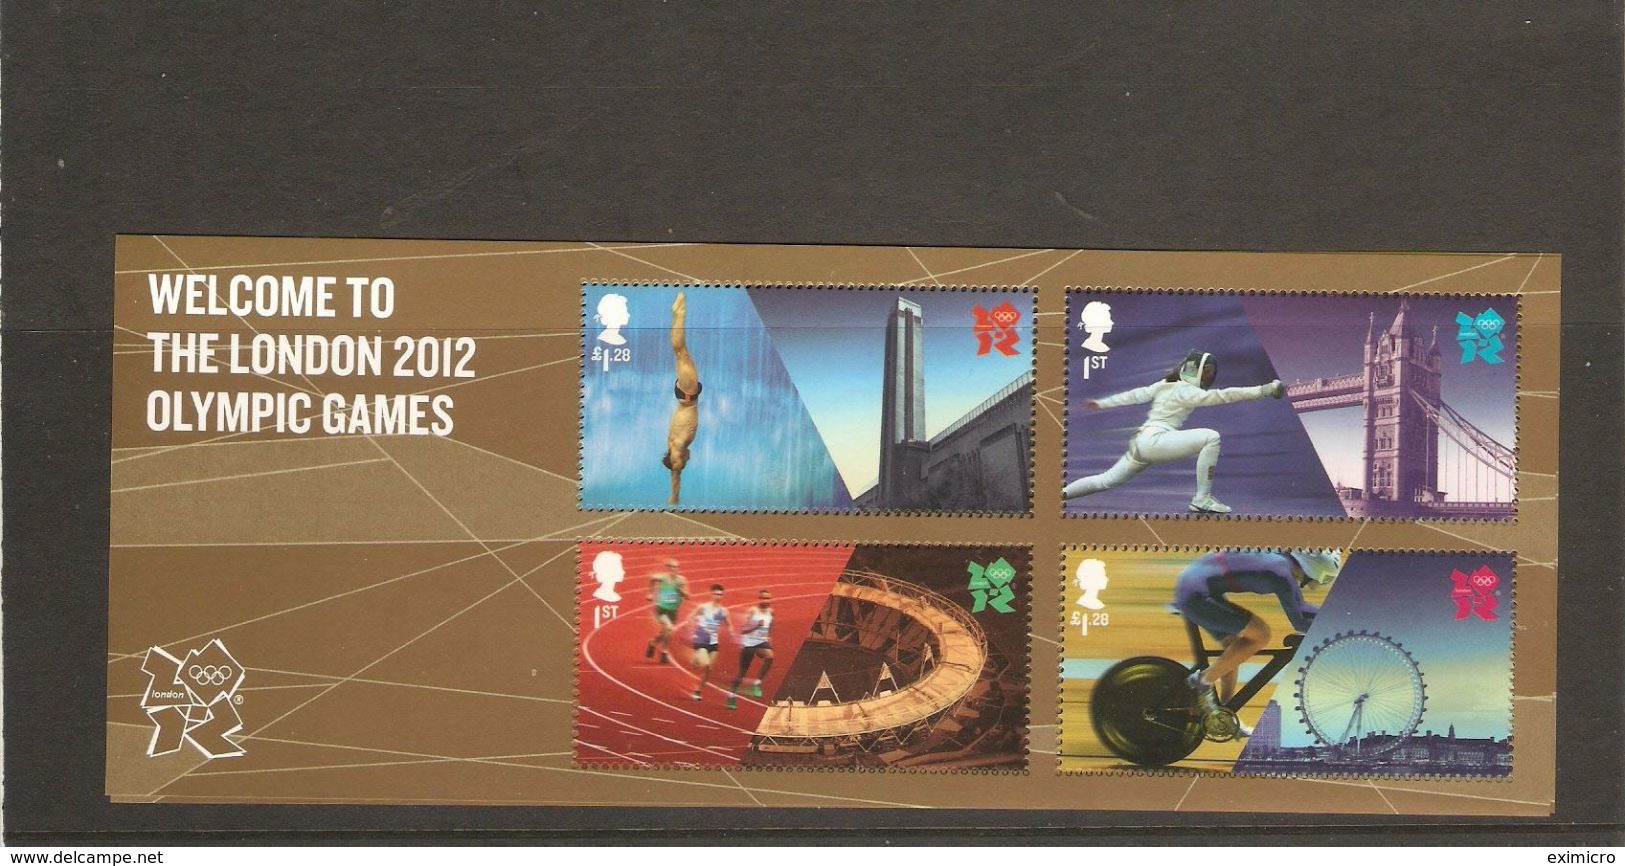 GREAT BRITAIN 2012 WELCOME TO LONDON 2012 OLYMPIC GAMES MINIATURE SHEET UNMOUNTED MINT - Blocks & Miniature Sheets